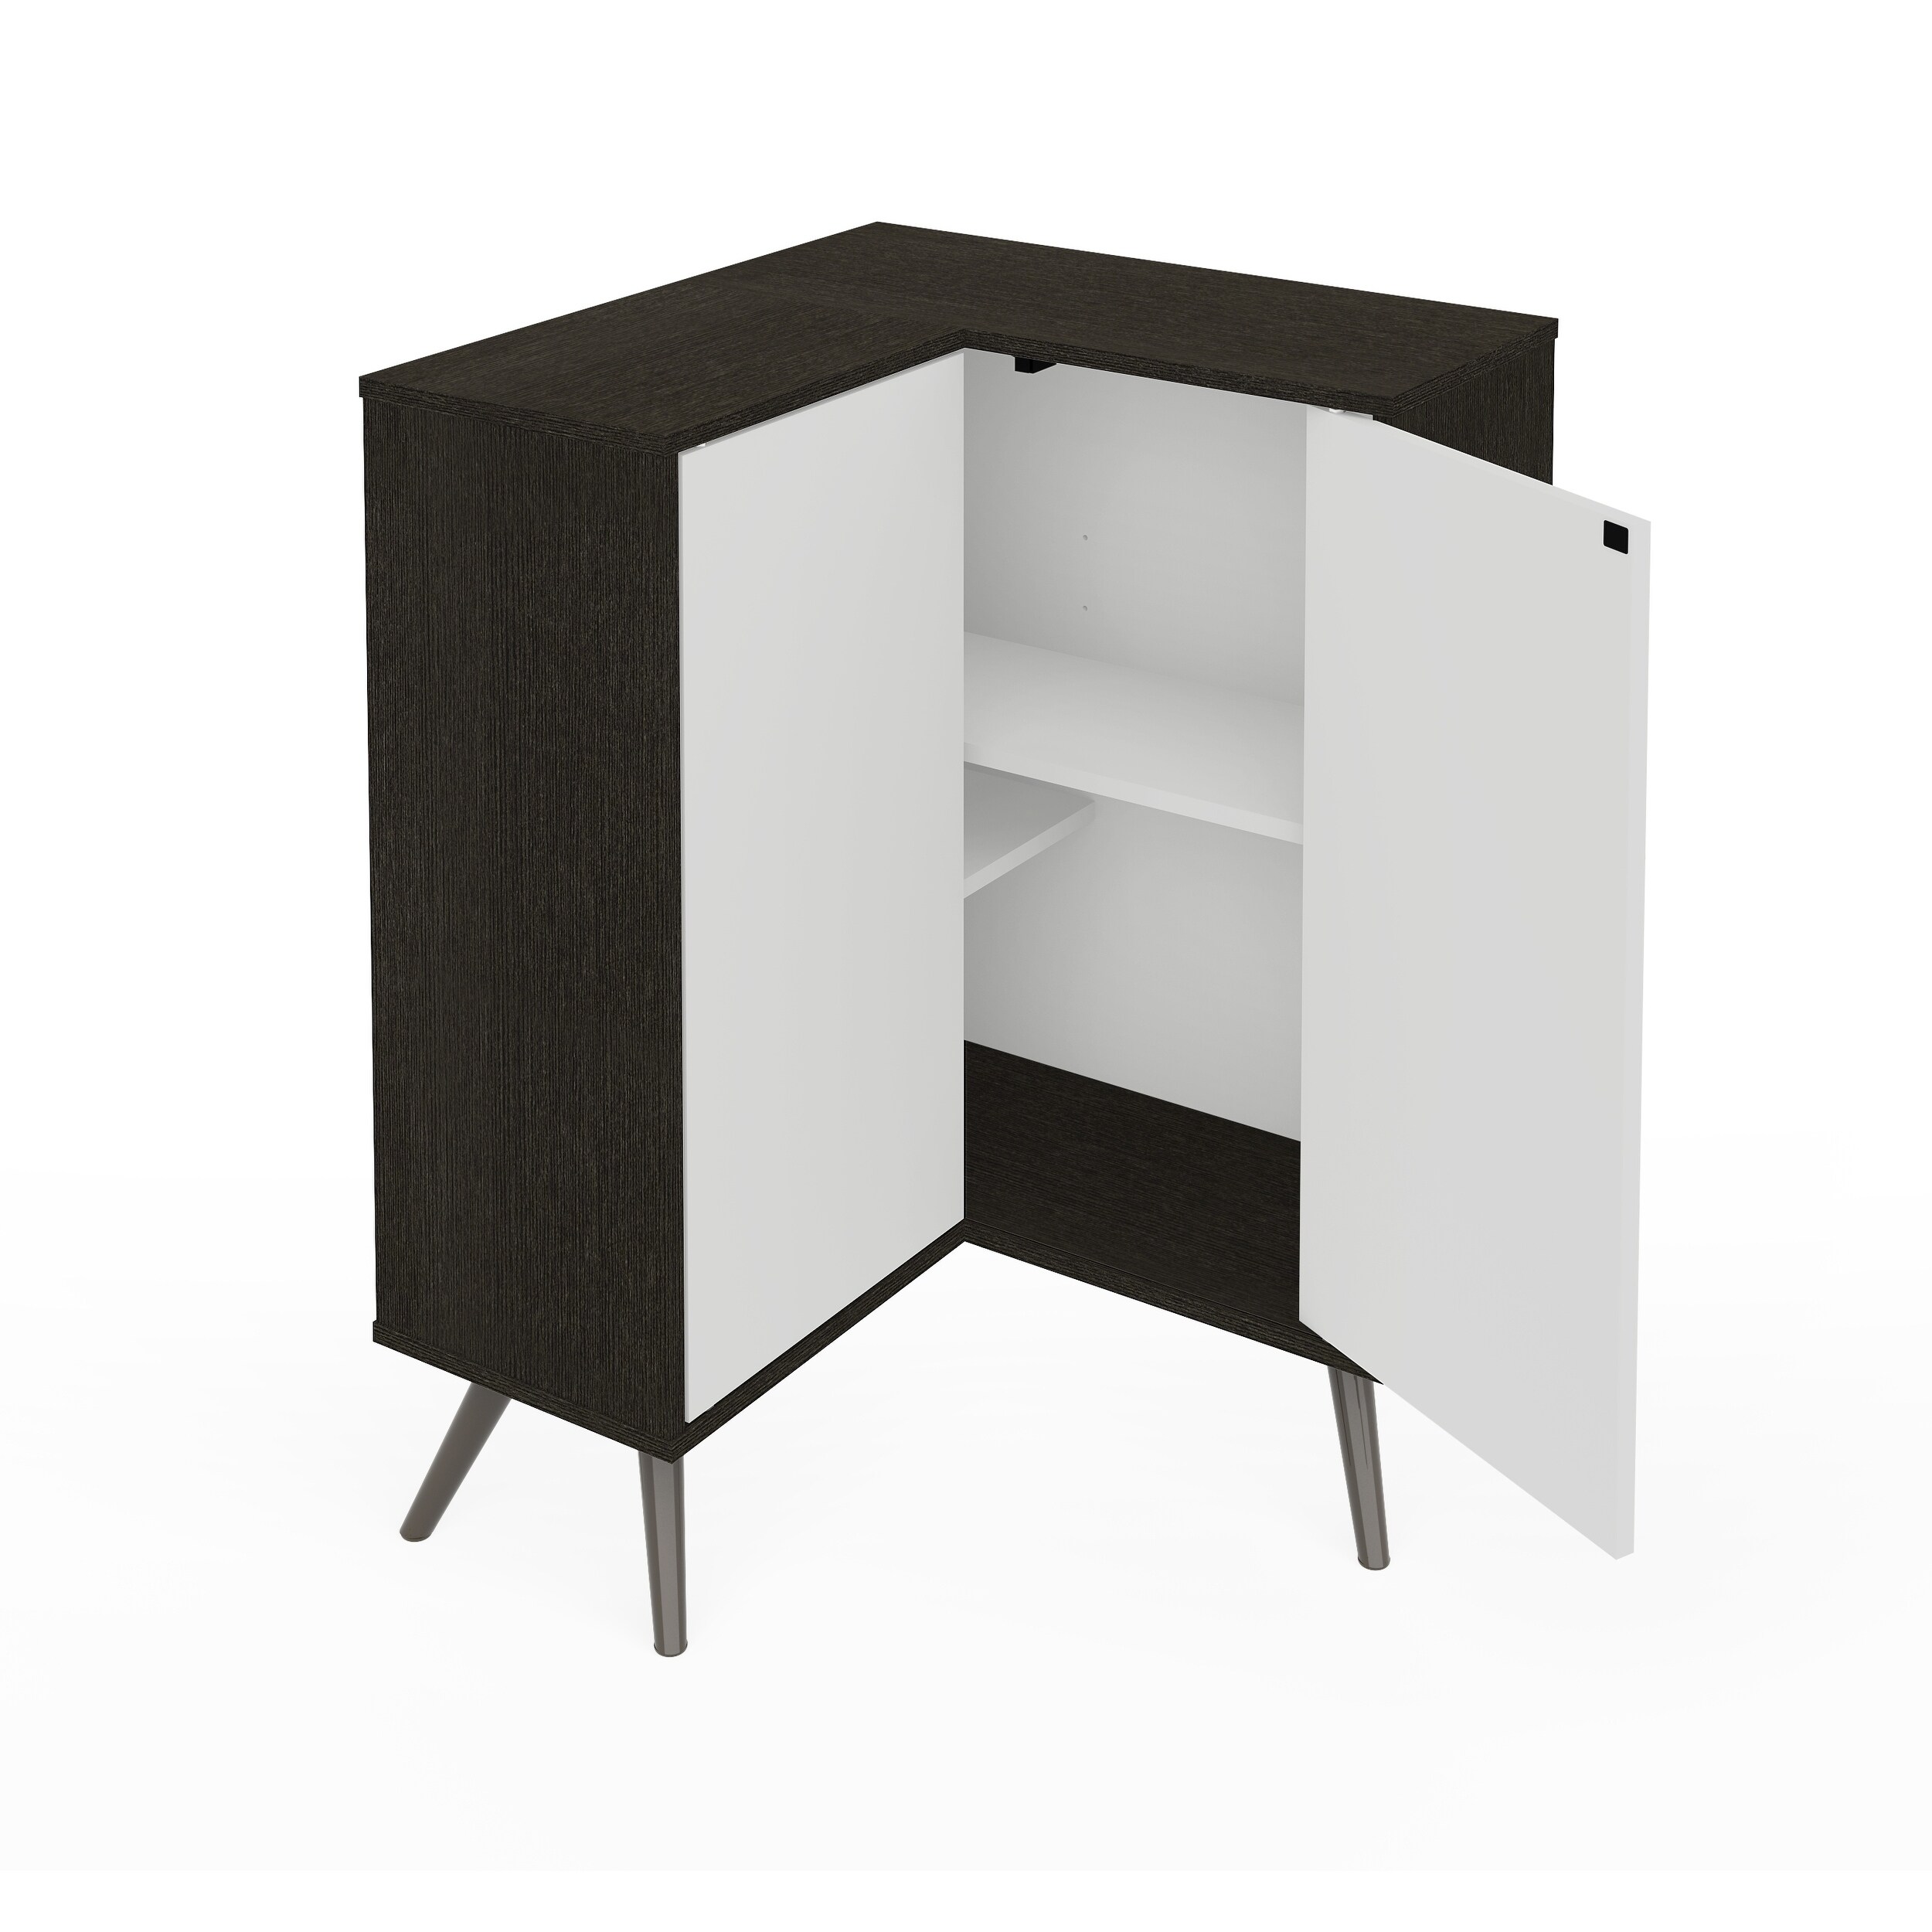 Small Space Storage Cabinet